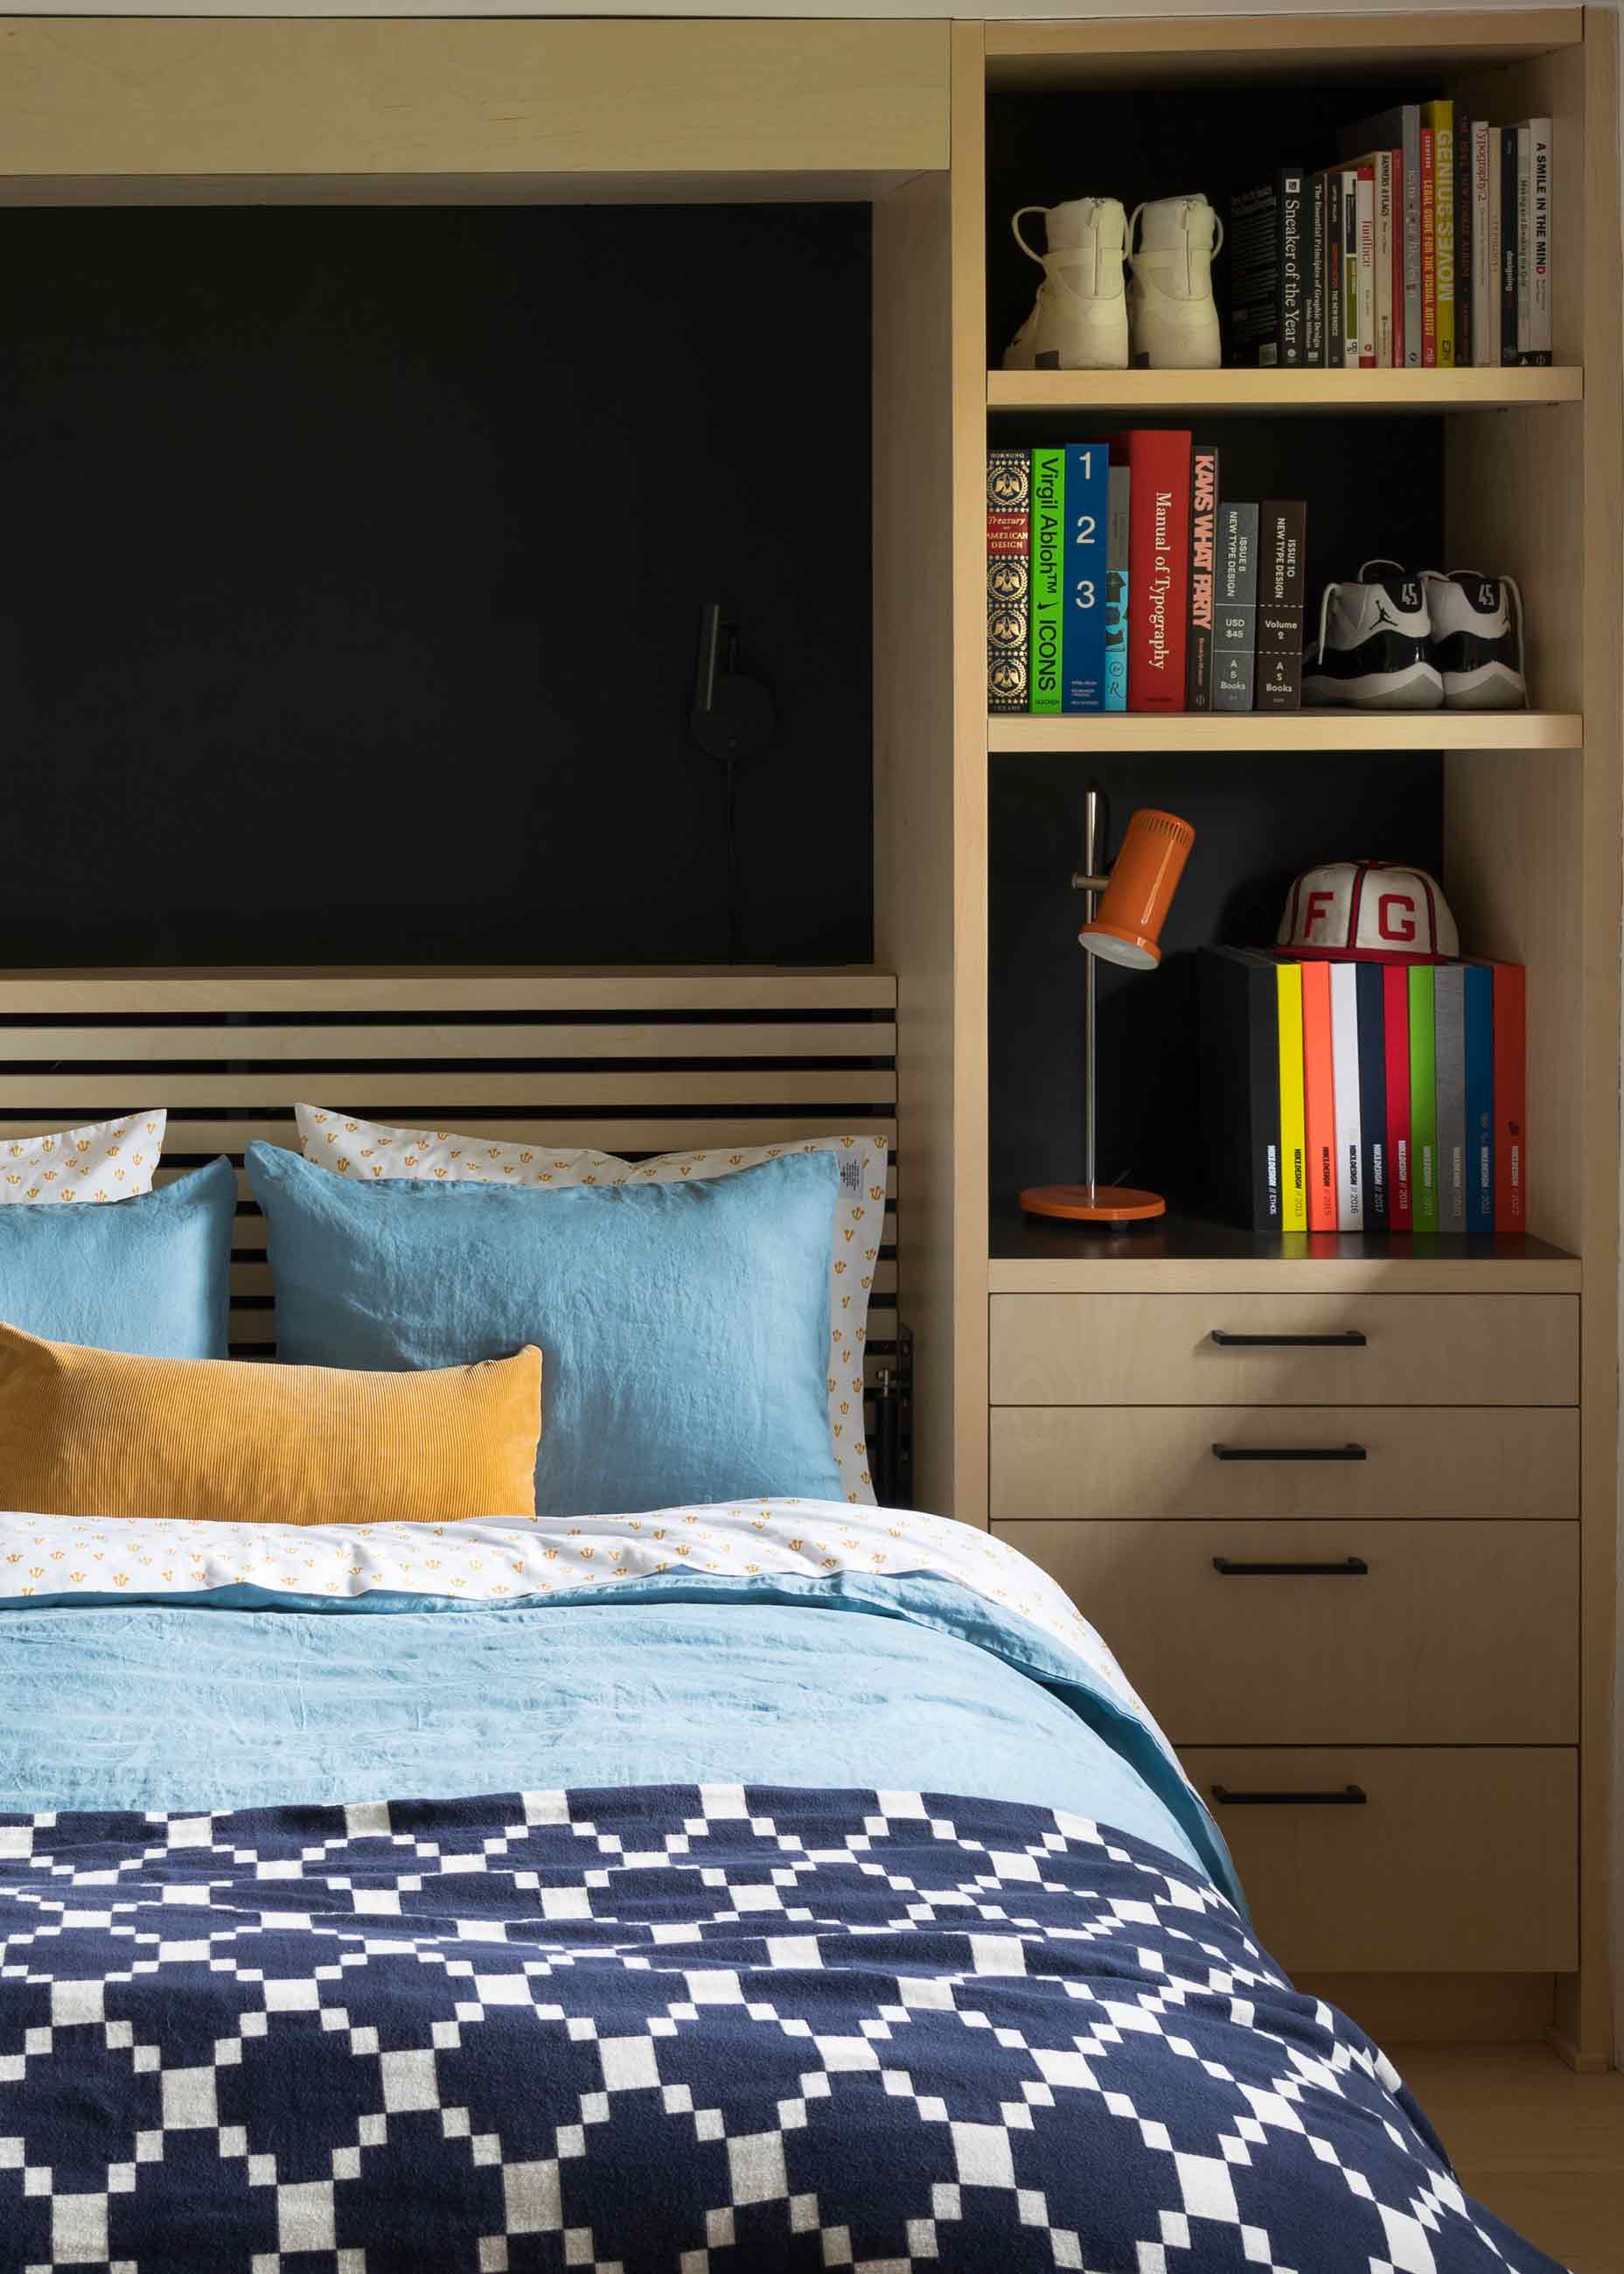 Murphy bed with blue bedding.